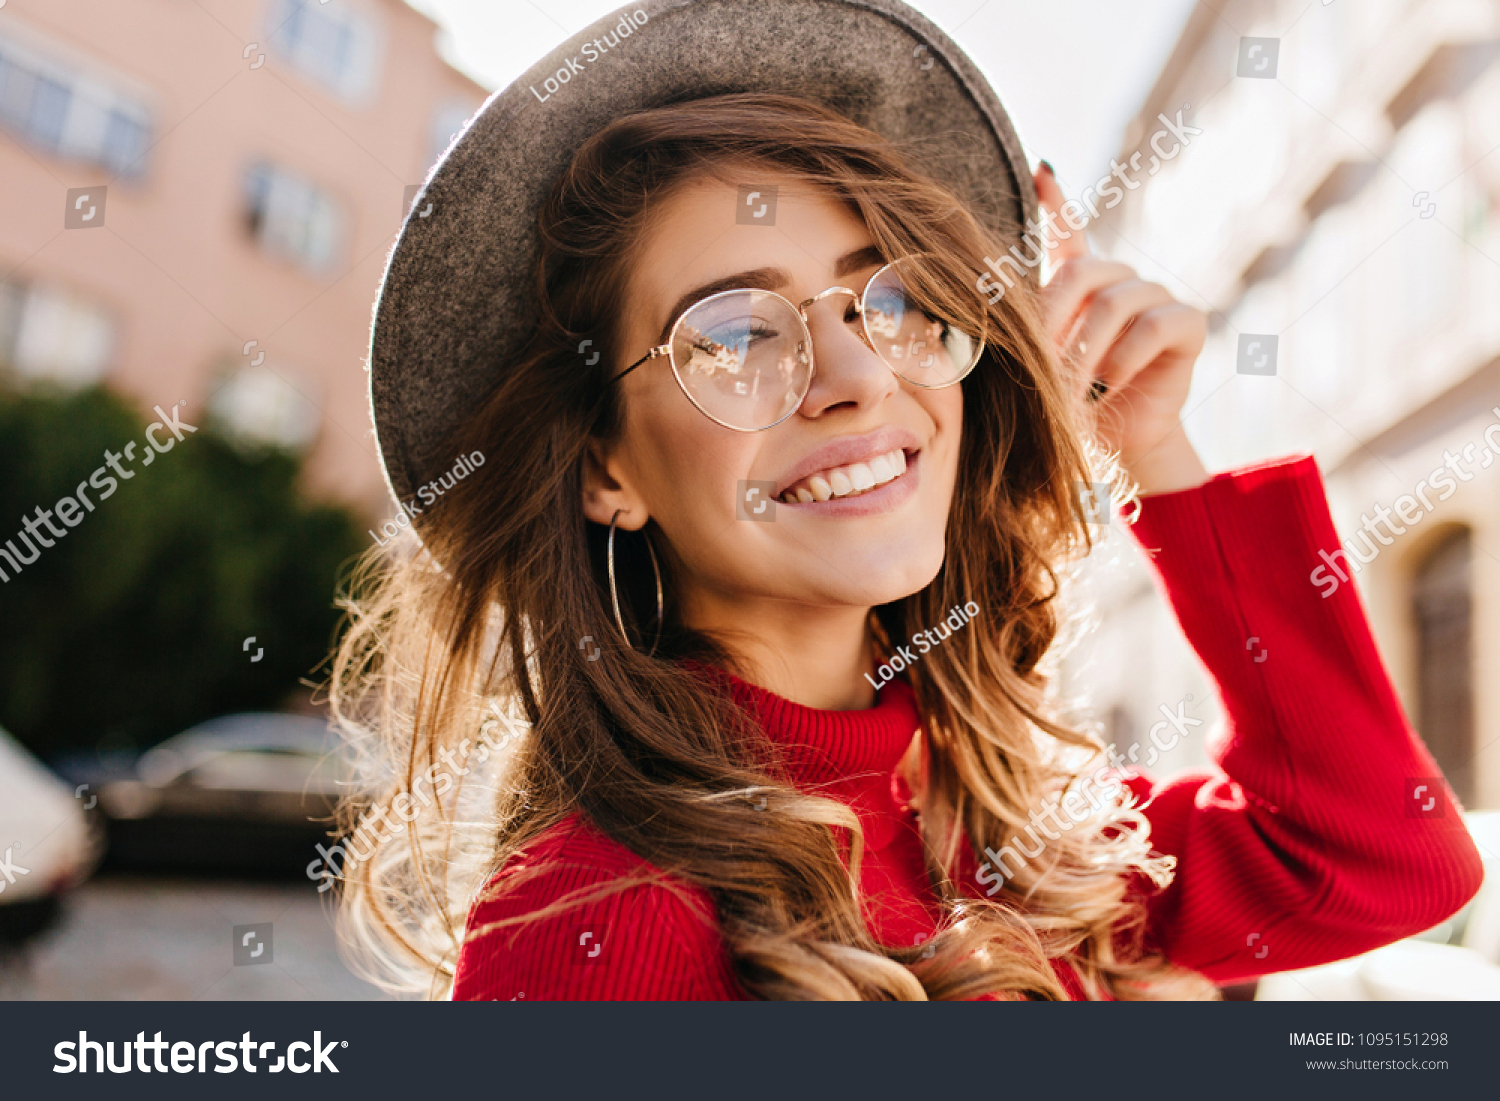 Close-up portrait of cheerful white woman in glasses touching her hat on blur background. Photo of fashionable girl with beautiful brown hair smiling to camera. #1095151298